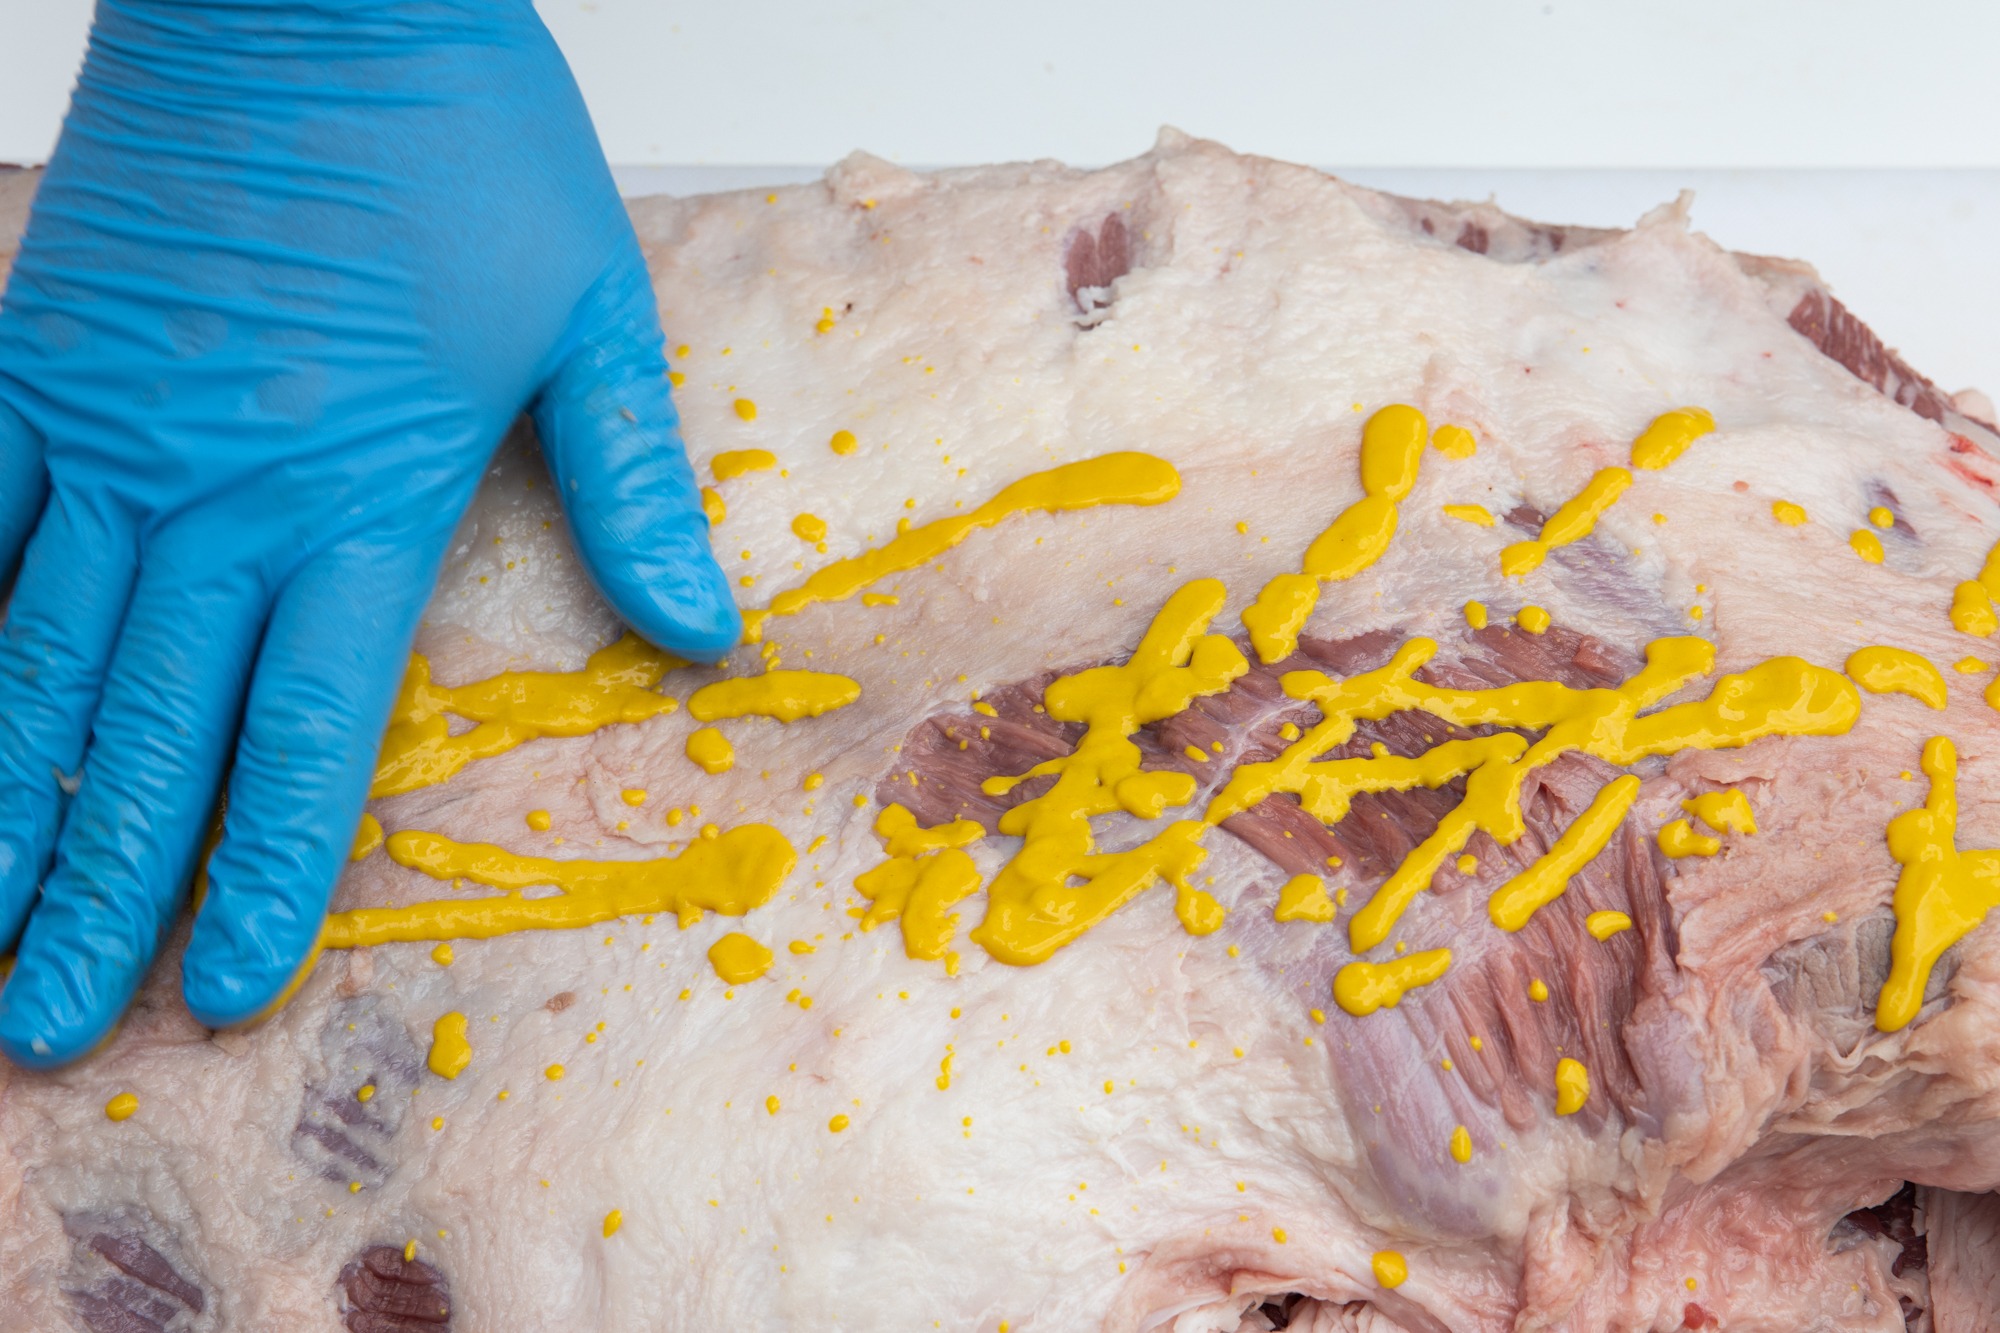 Applying yellow mustard as a binder to the brisket